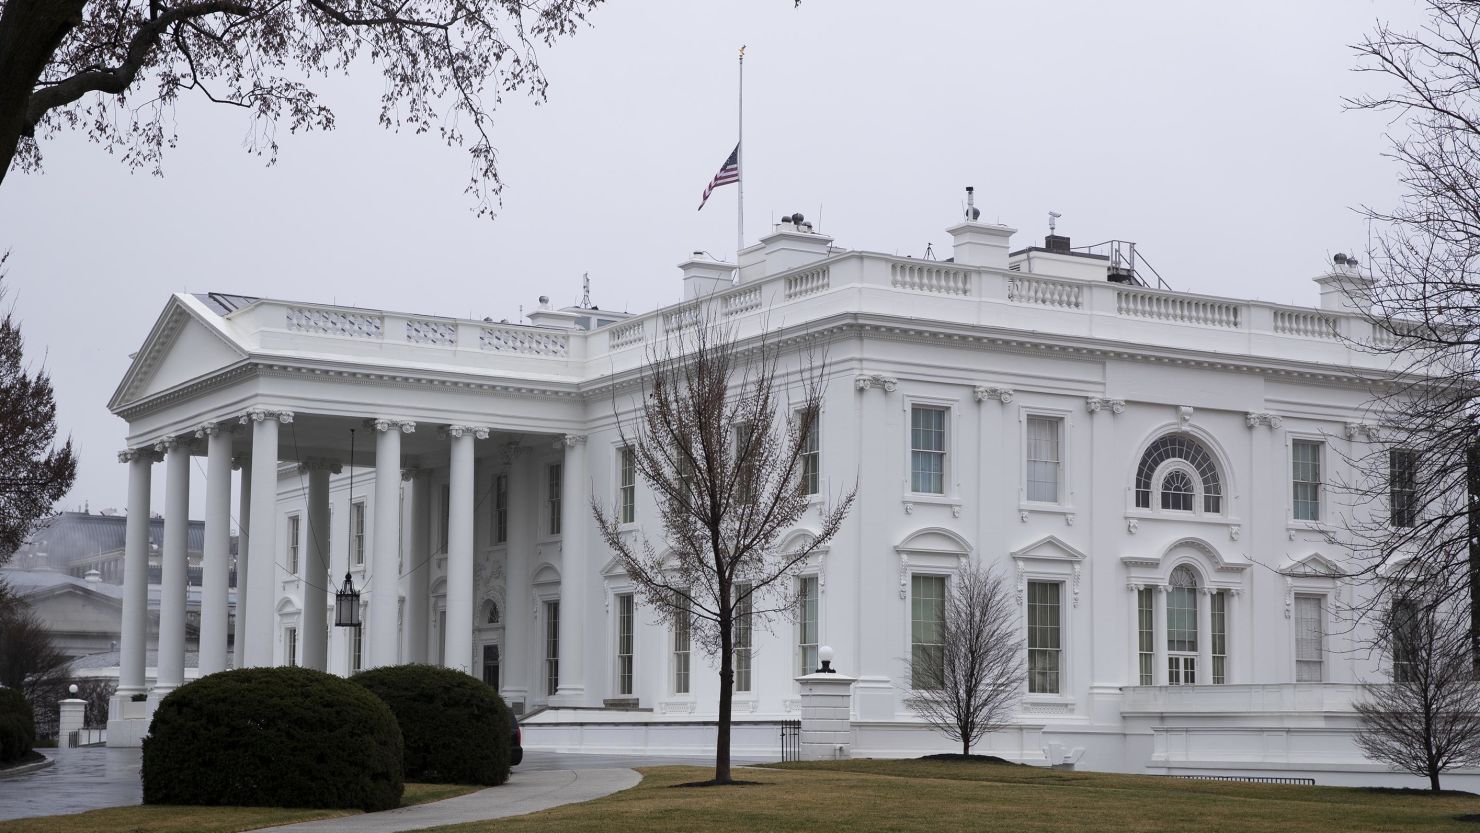 An American flag flies at half-staff over the White House in Washington, D.C., U.S., on Thursday, March 18, 2021. U.S. President Joe Biden ordered national flags to be flown at half-staff to honor the victims of the shootings in the Atlanta area that killed eight people. 